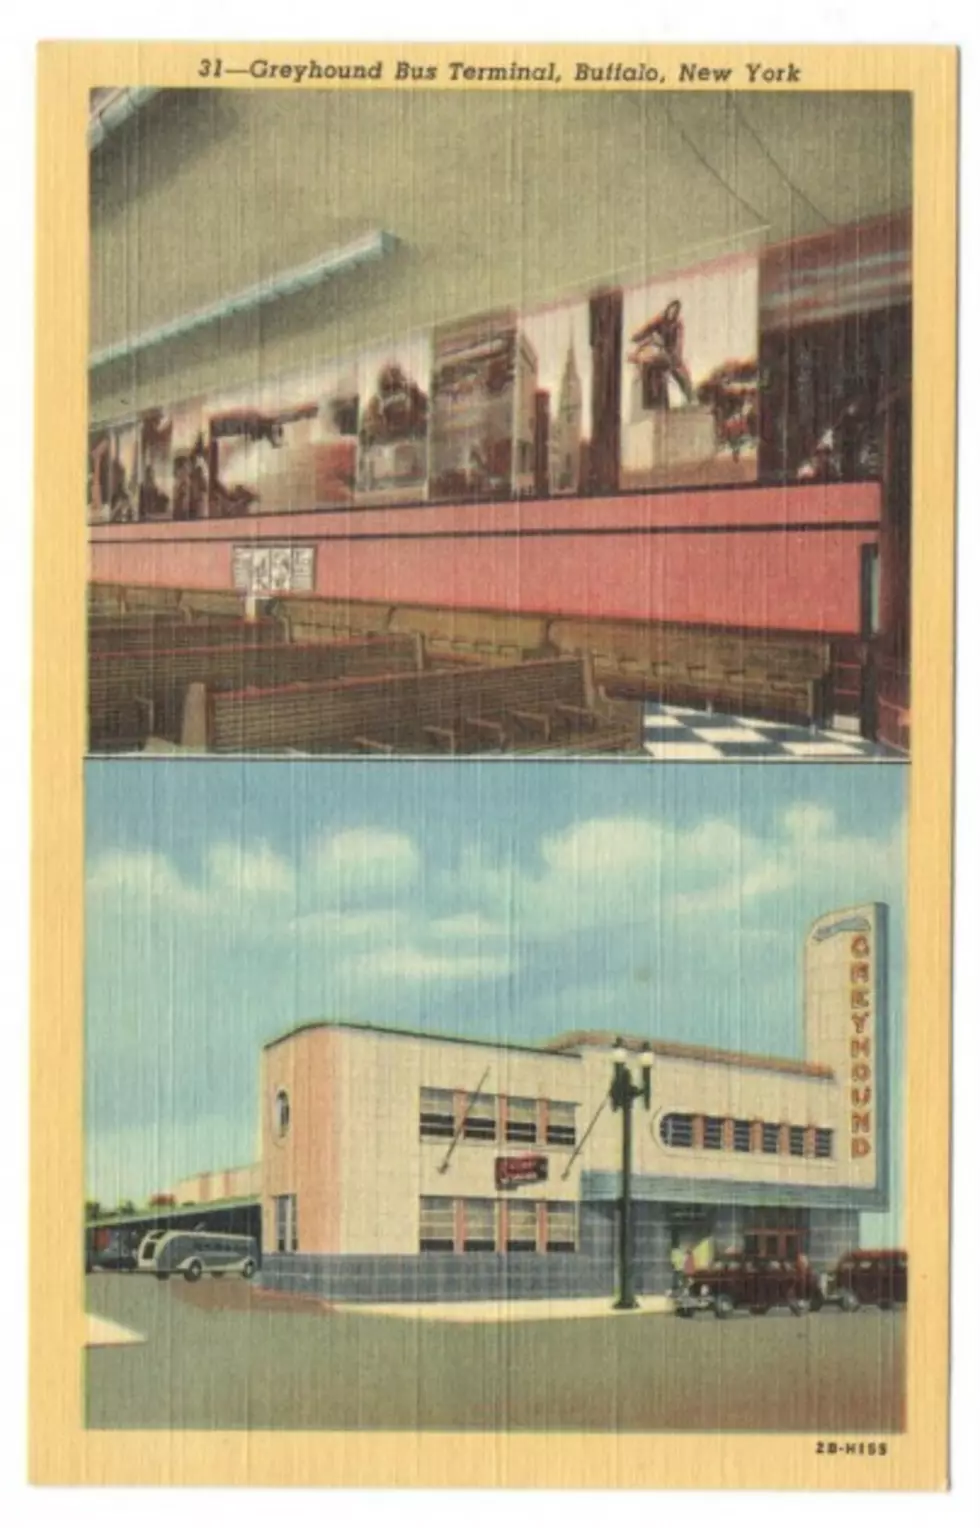 Buffalo's Greyhound Bus Terminal — Example of Building Re-use [BUFFALO: THEN AND NOW]